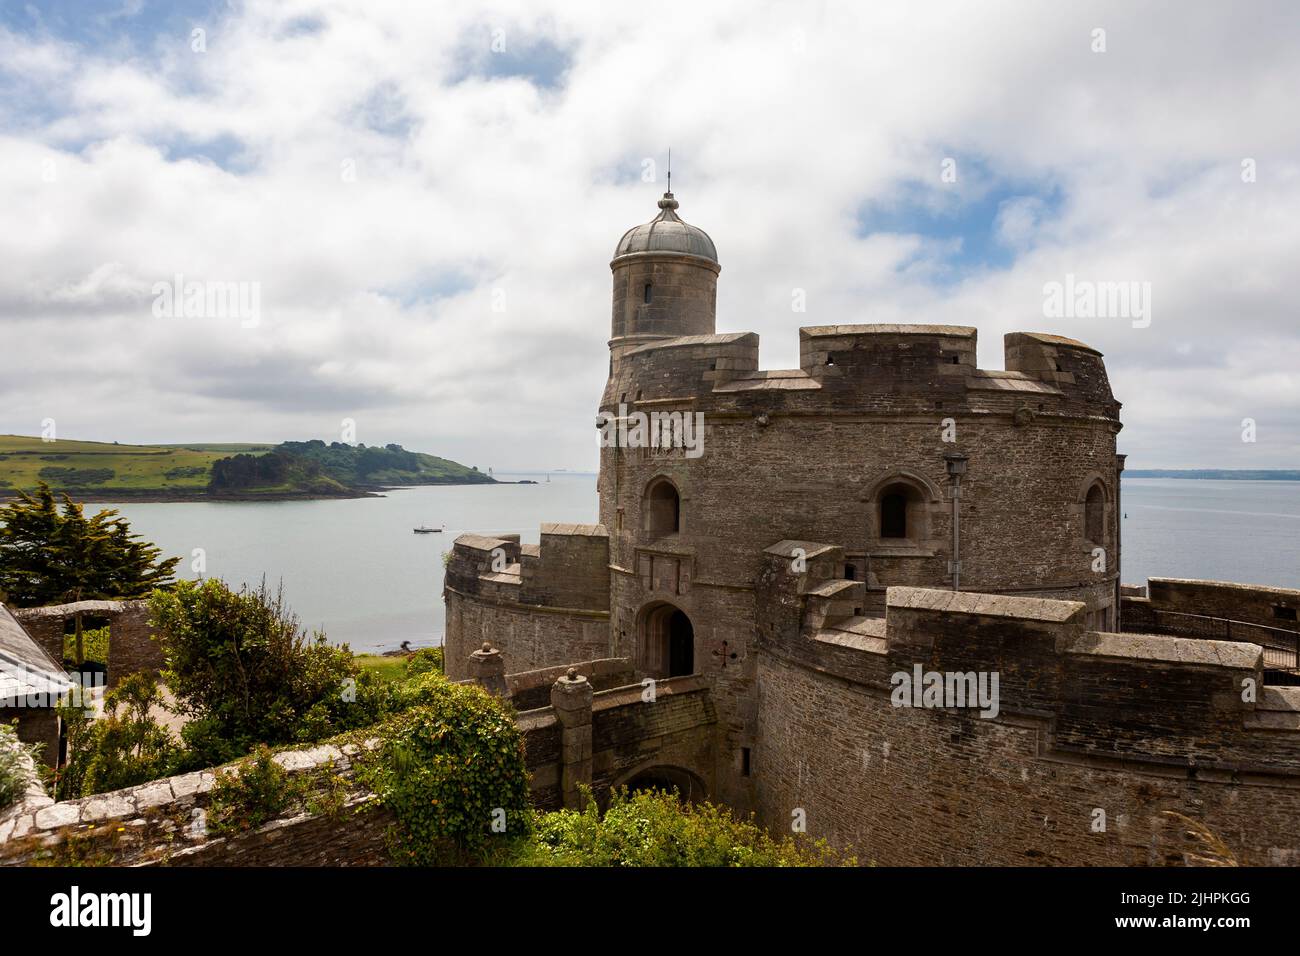 St. Mawes Castle: 16th century artillery fort guarding the anchorage of Carrick Roads, River Fal, Cornwall, UK Stock Photo